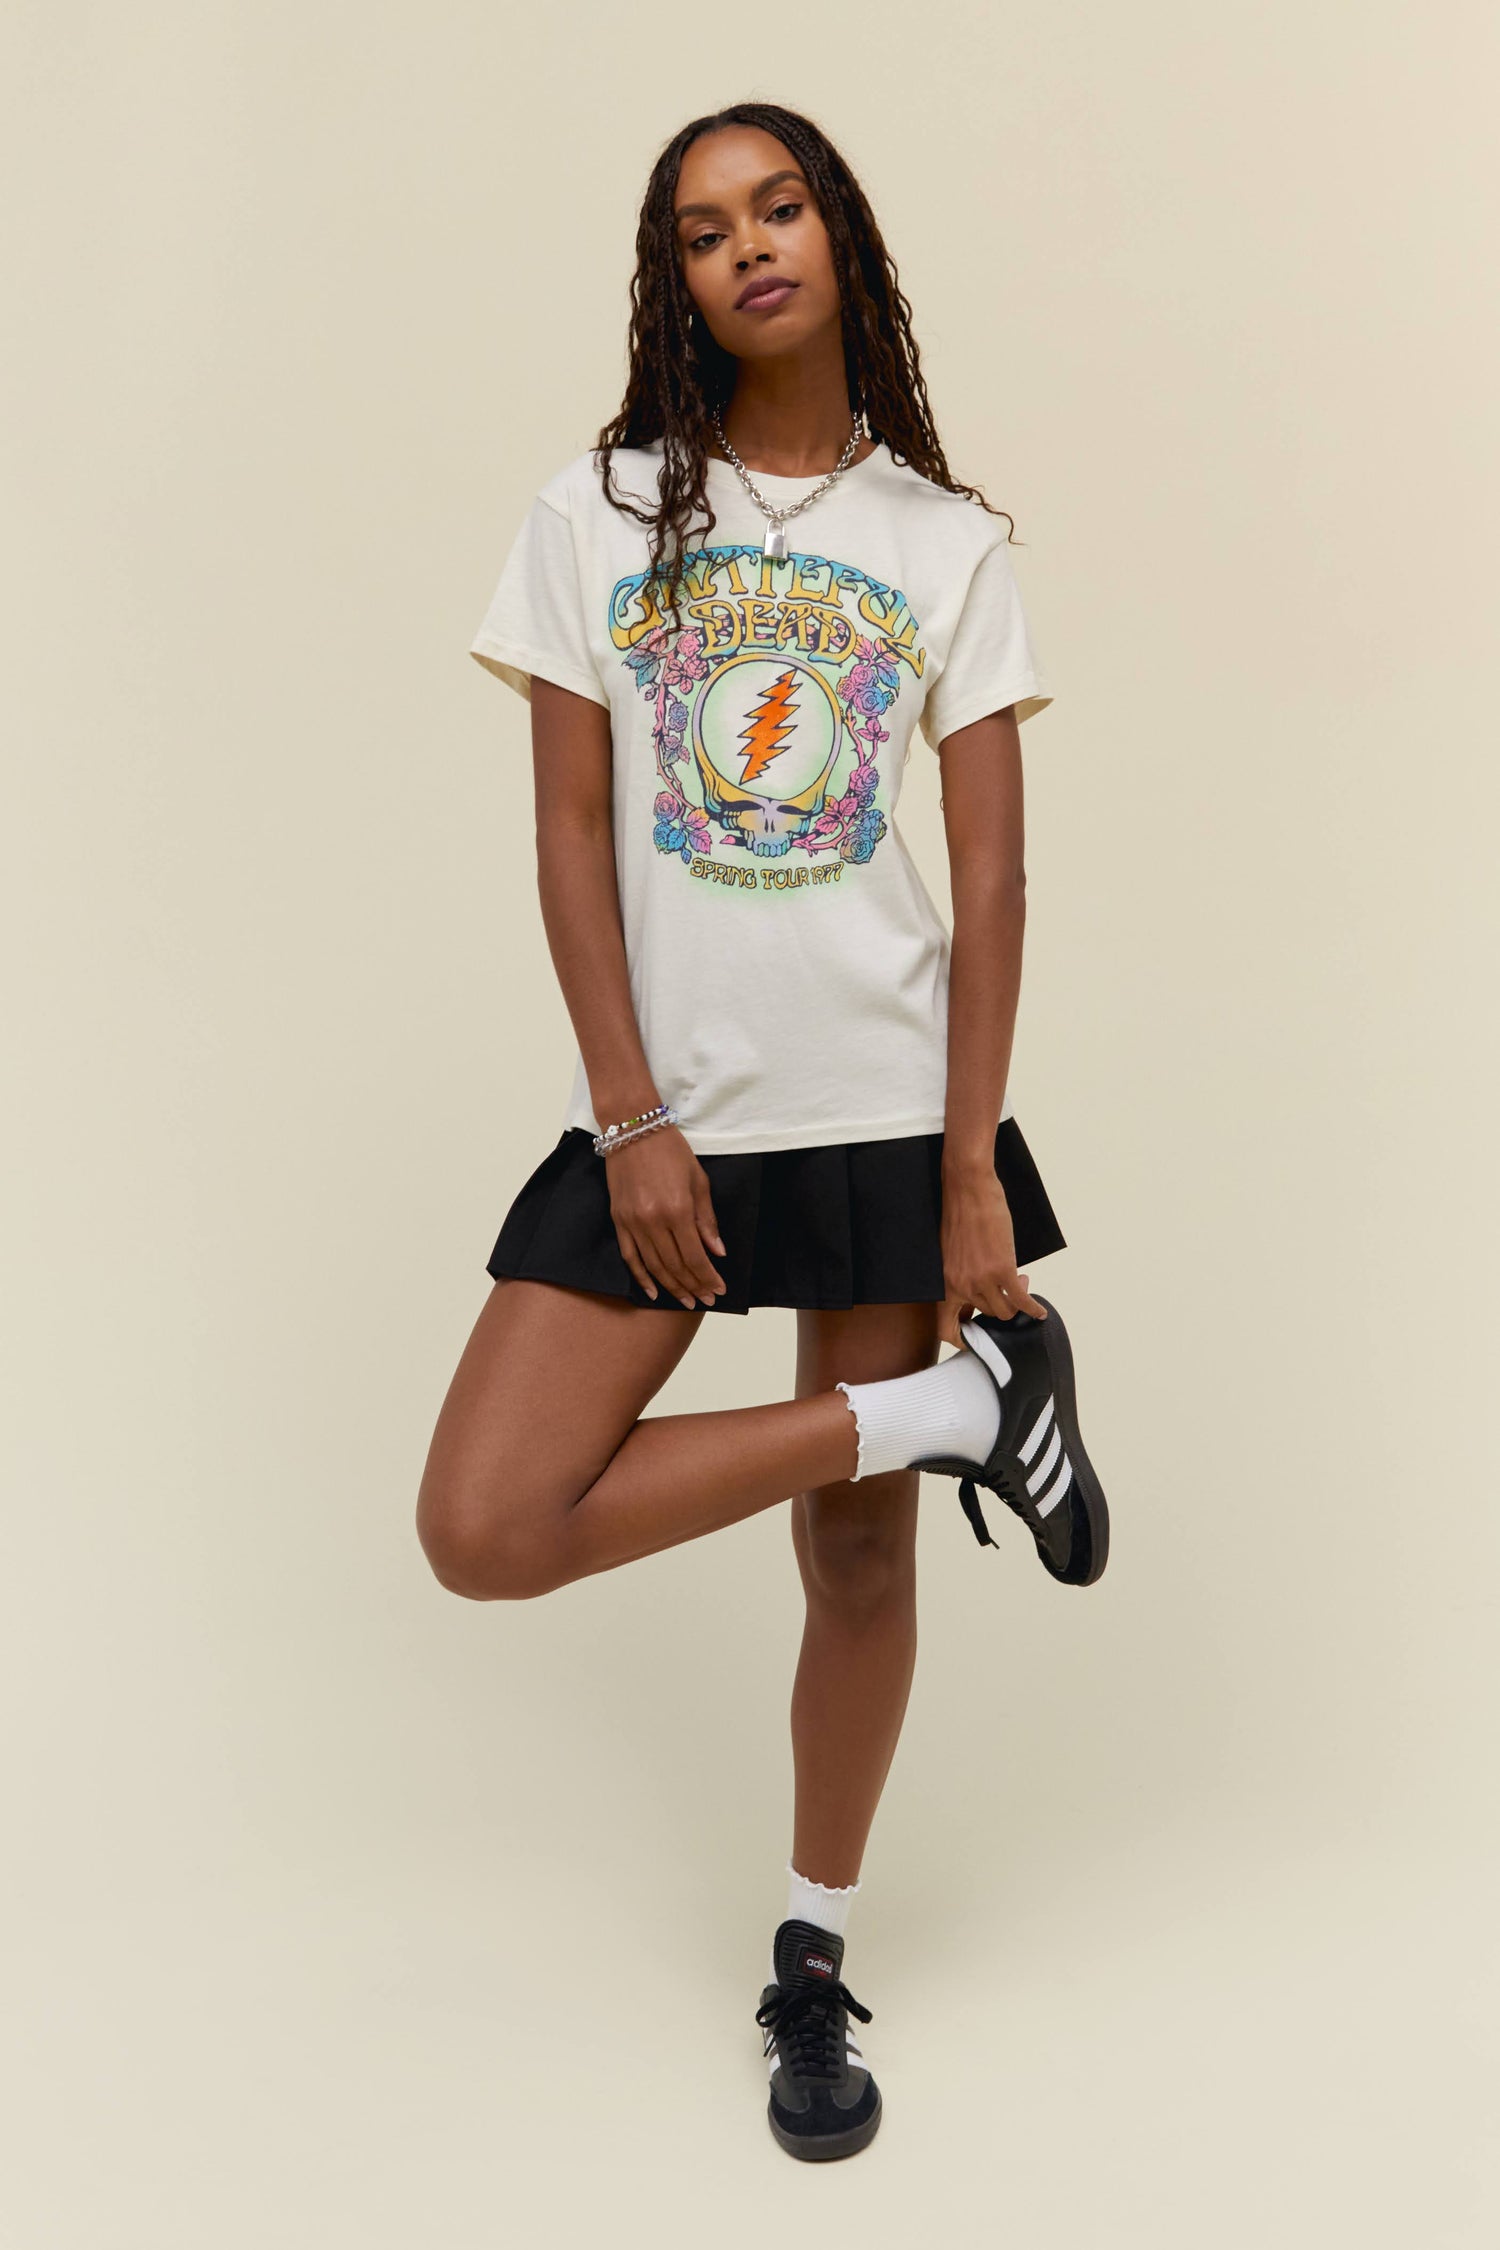 A model featuring a white tour tee shamped with 'Grateful Dead'